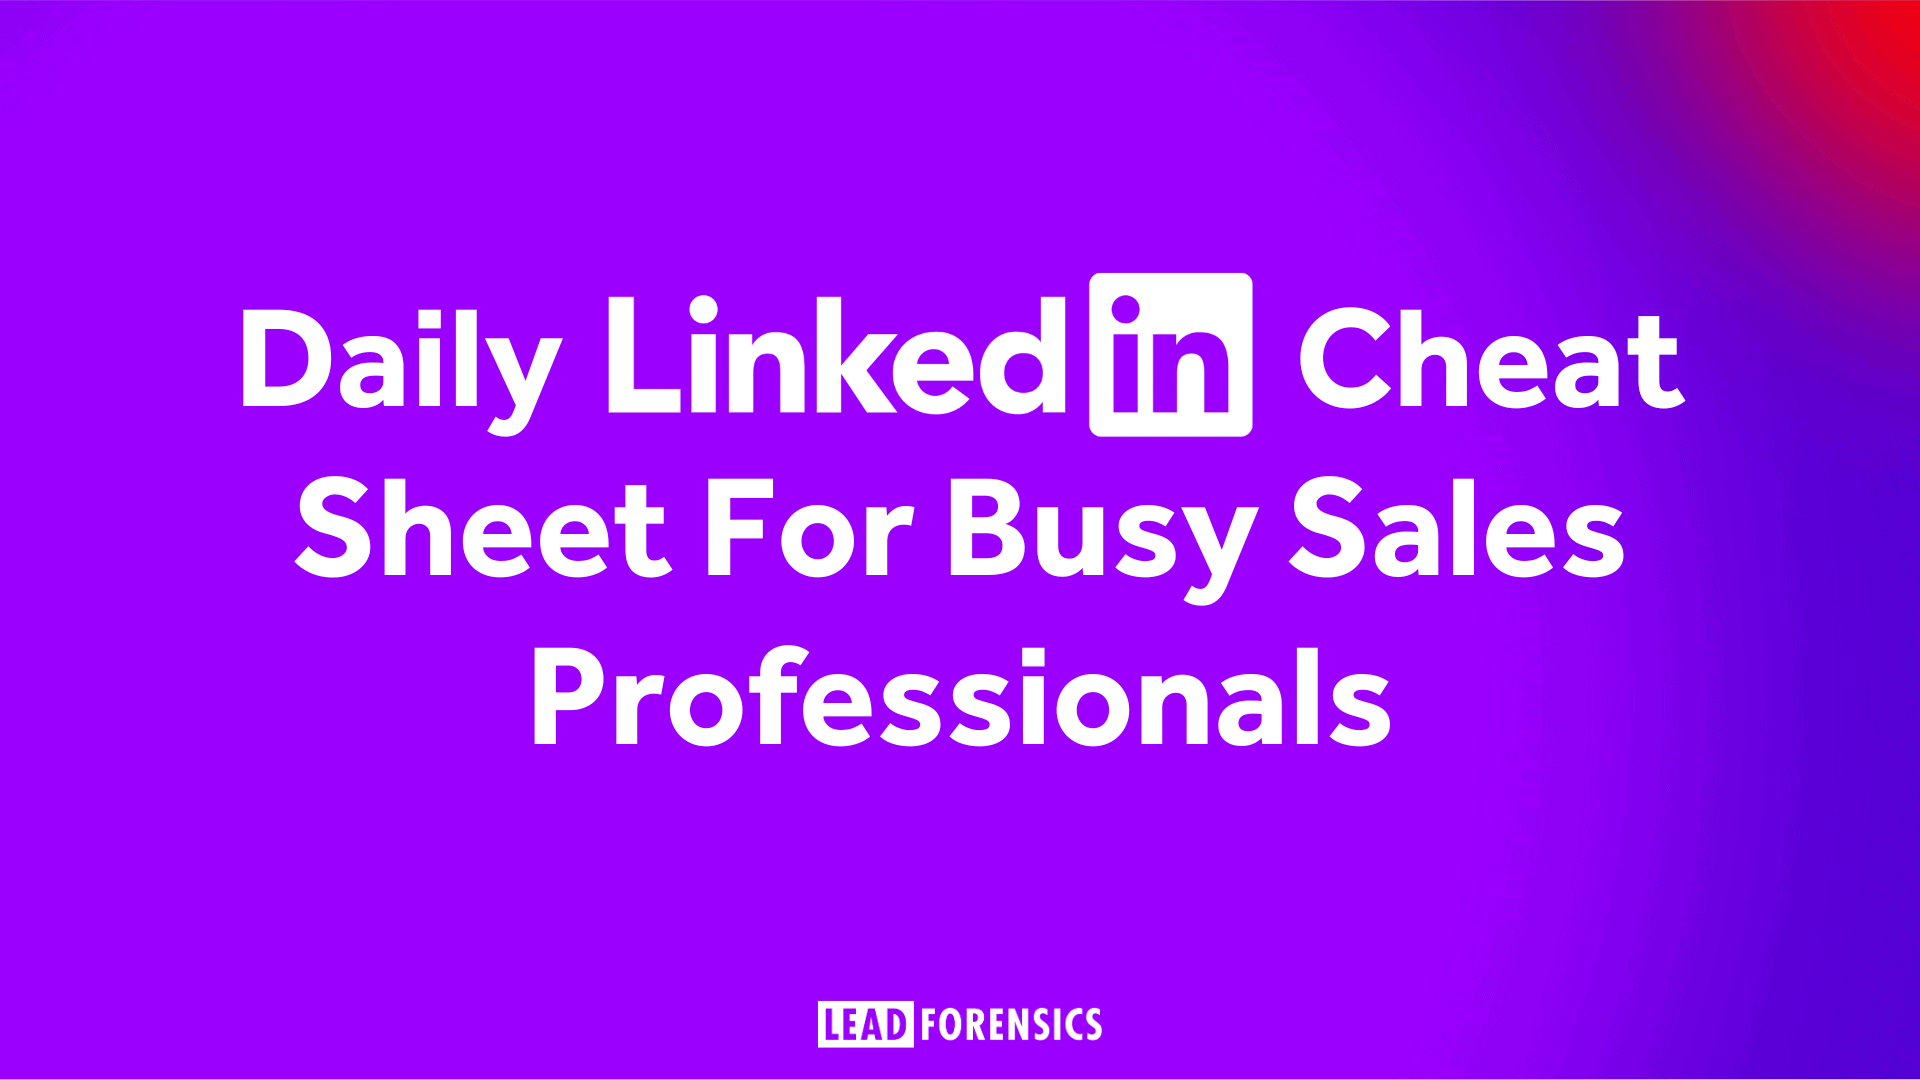 Daily Linkedin Cheat Sheet For Busy Sales Professionals